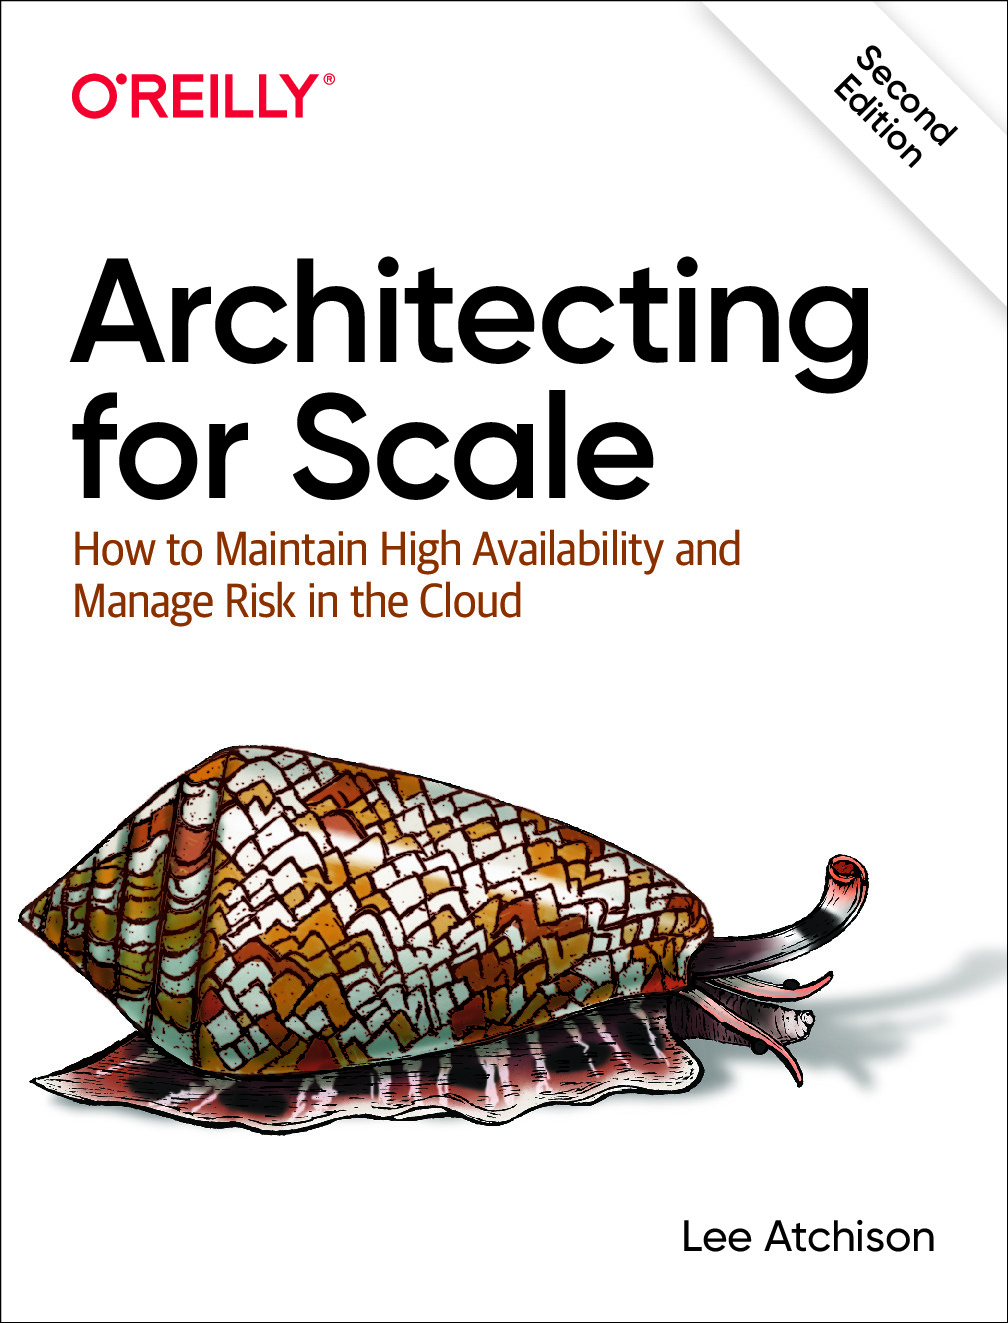 Lee Atchison – Architecting for Scale_ How to Maintain High Availability and Manage Risk in the Cloud-O’Reilly Media (2020)